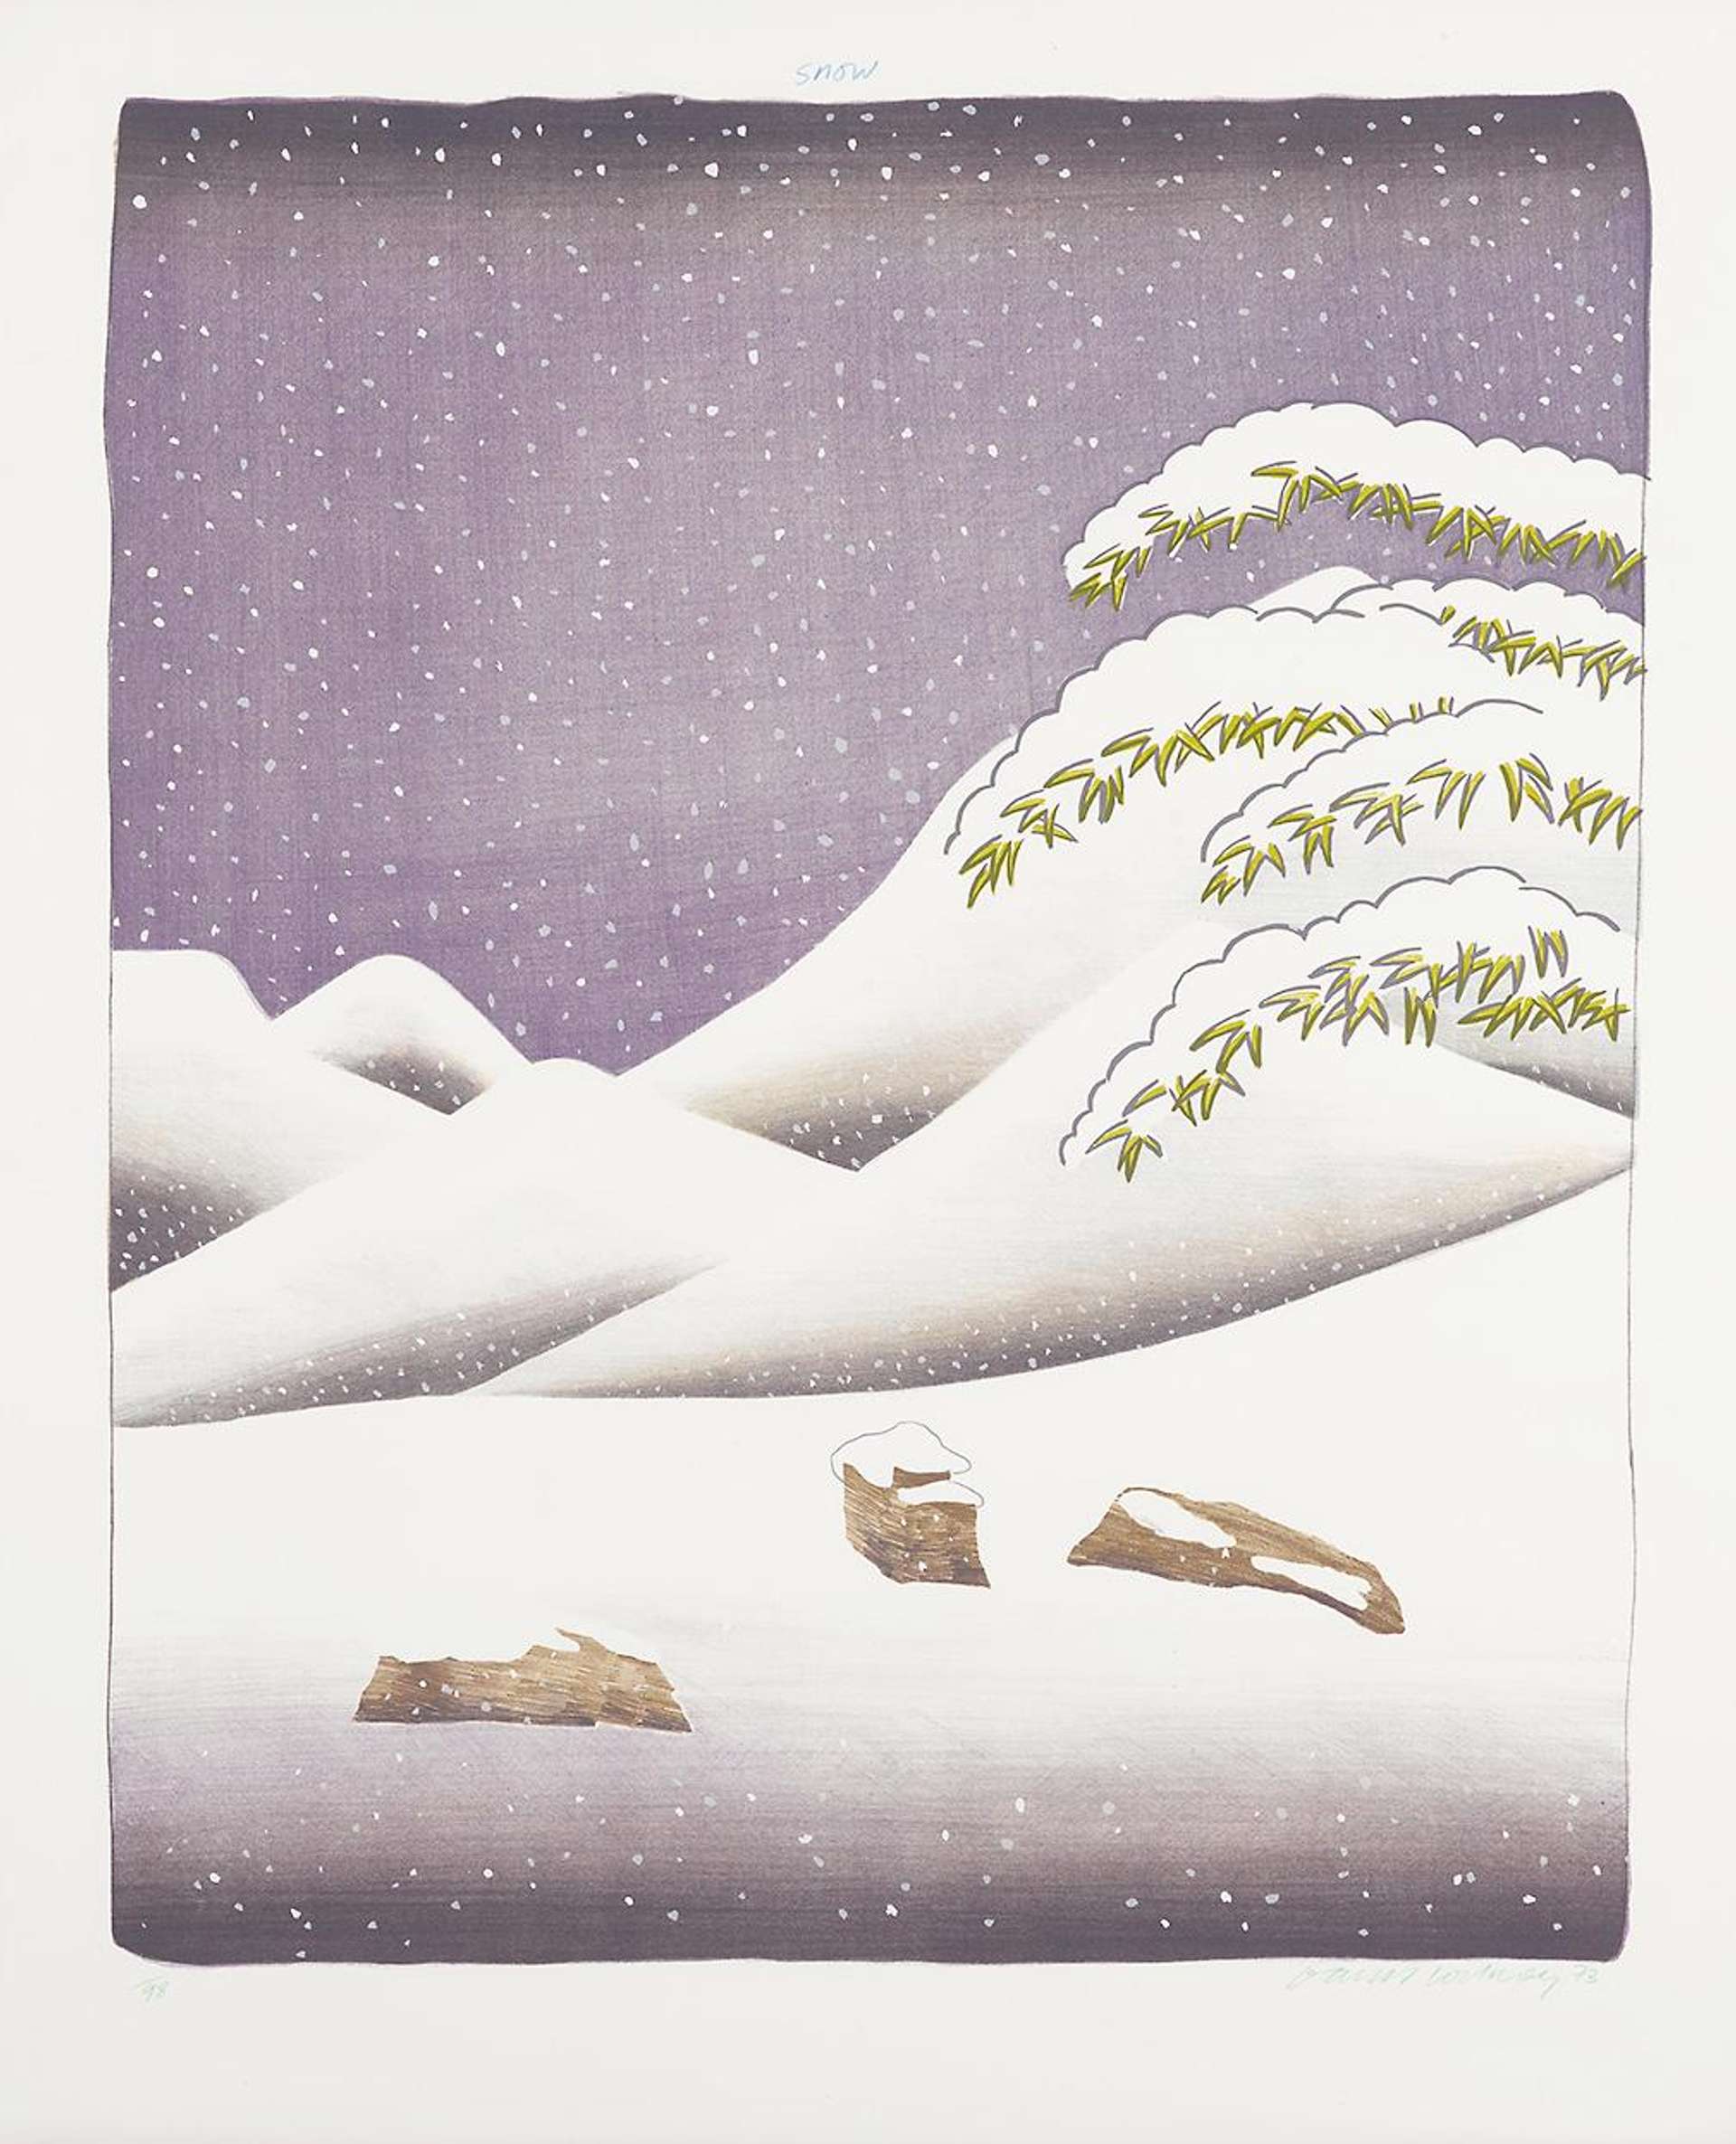 A snowscape by artist David Hockney, depicted in tones of lilac and white in a deliberately flat style.